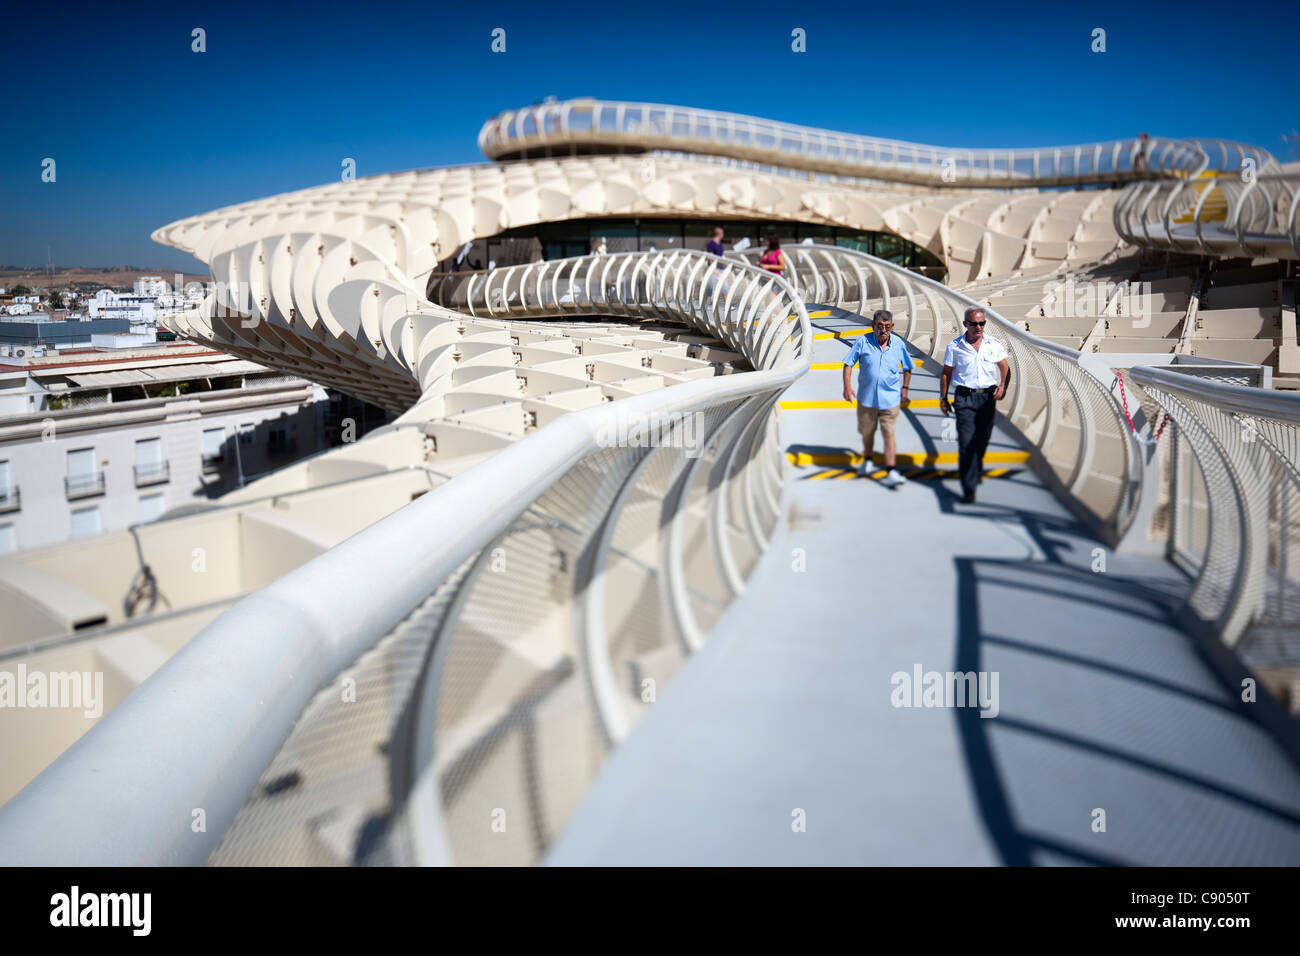 People on the walkway on the top of Metropol Parasol structure, Seville, Spain. Tilted lens used for shallower depth of field. Stock Photo